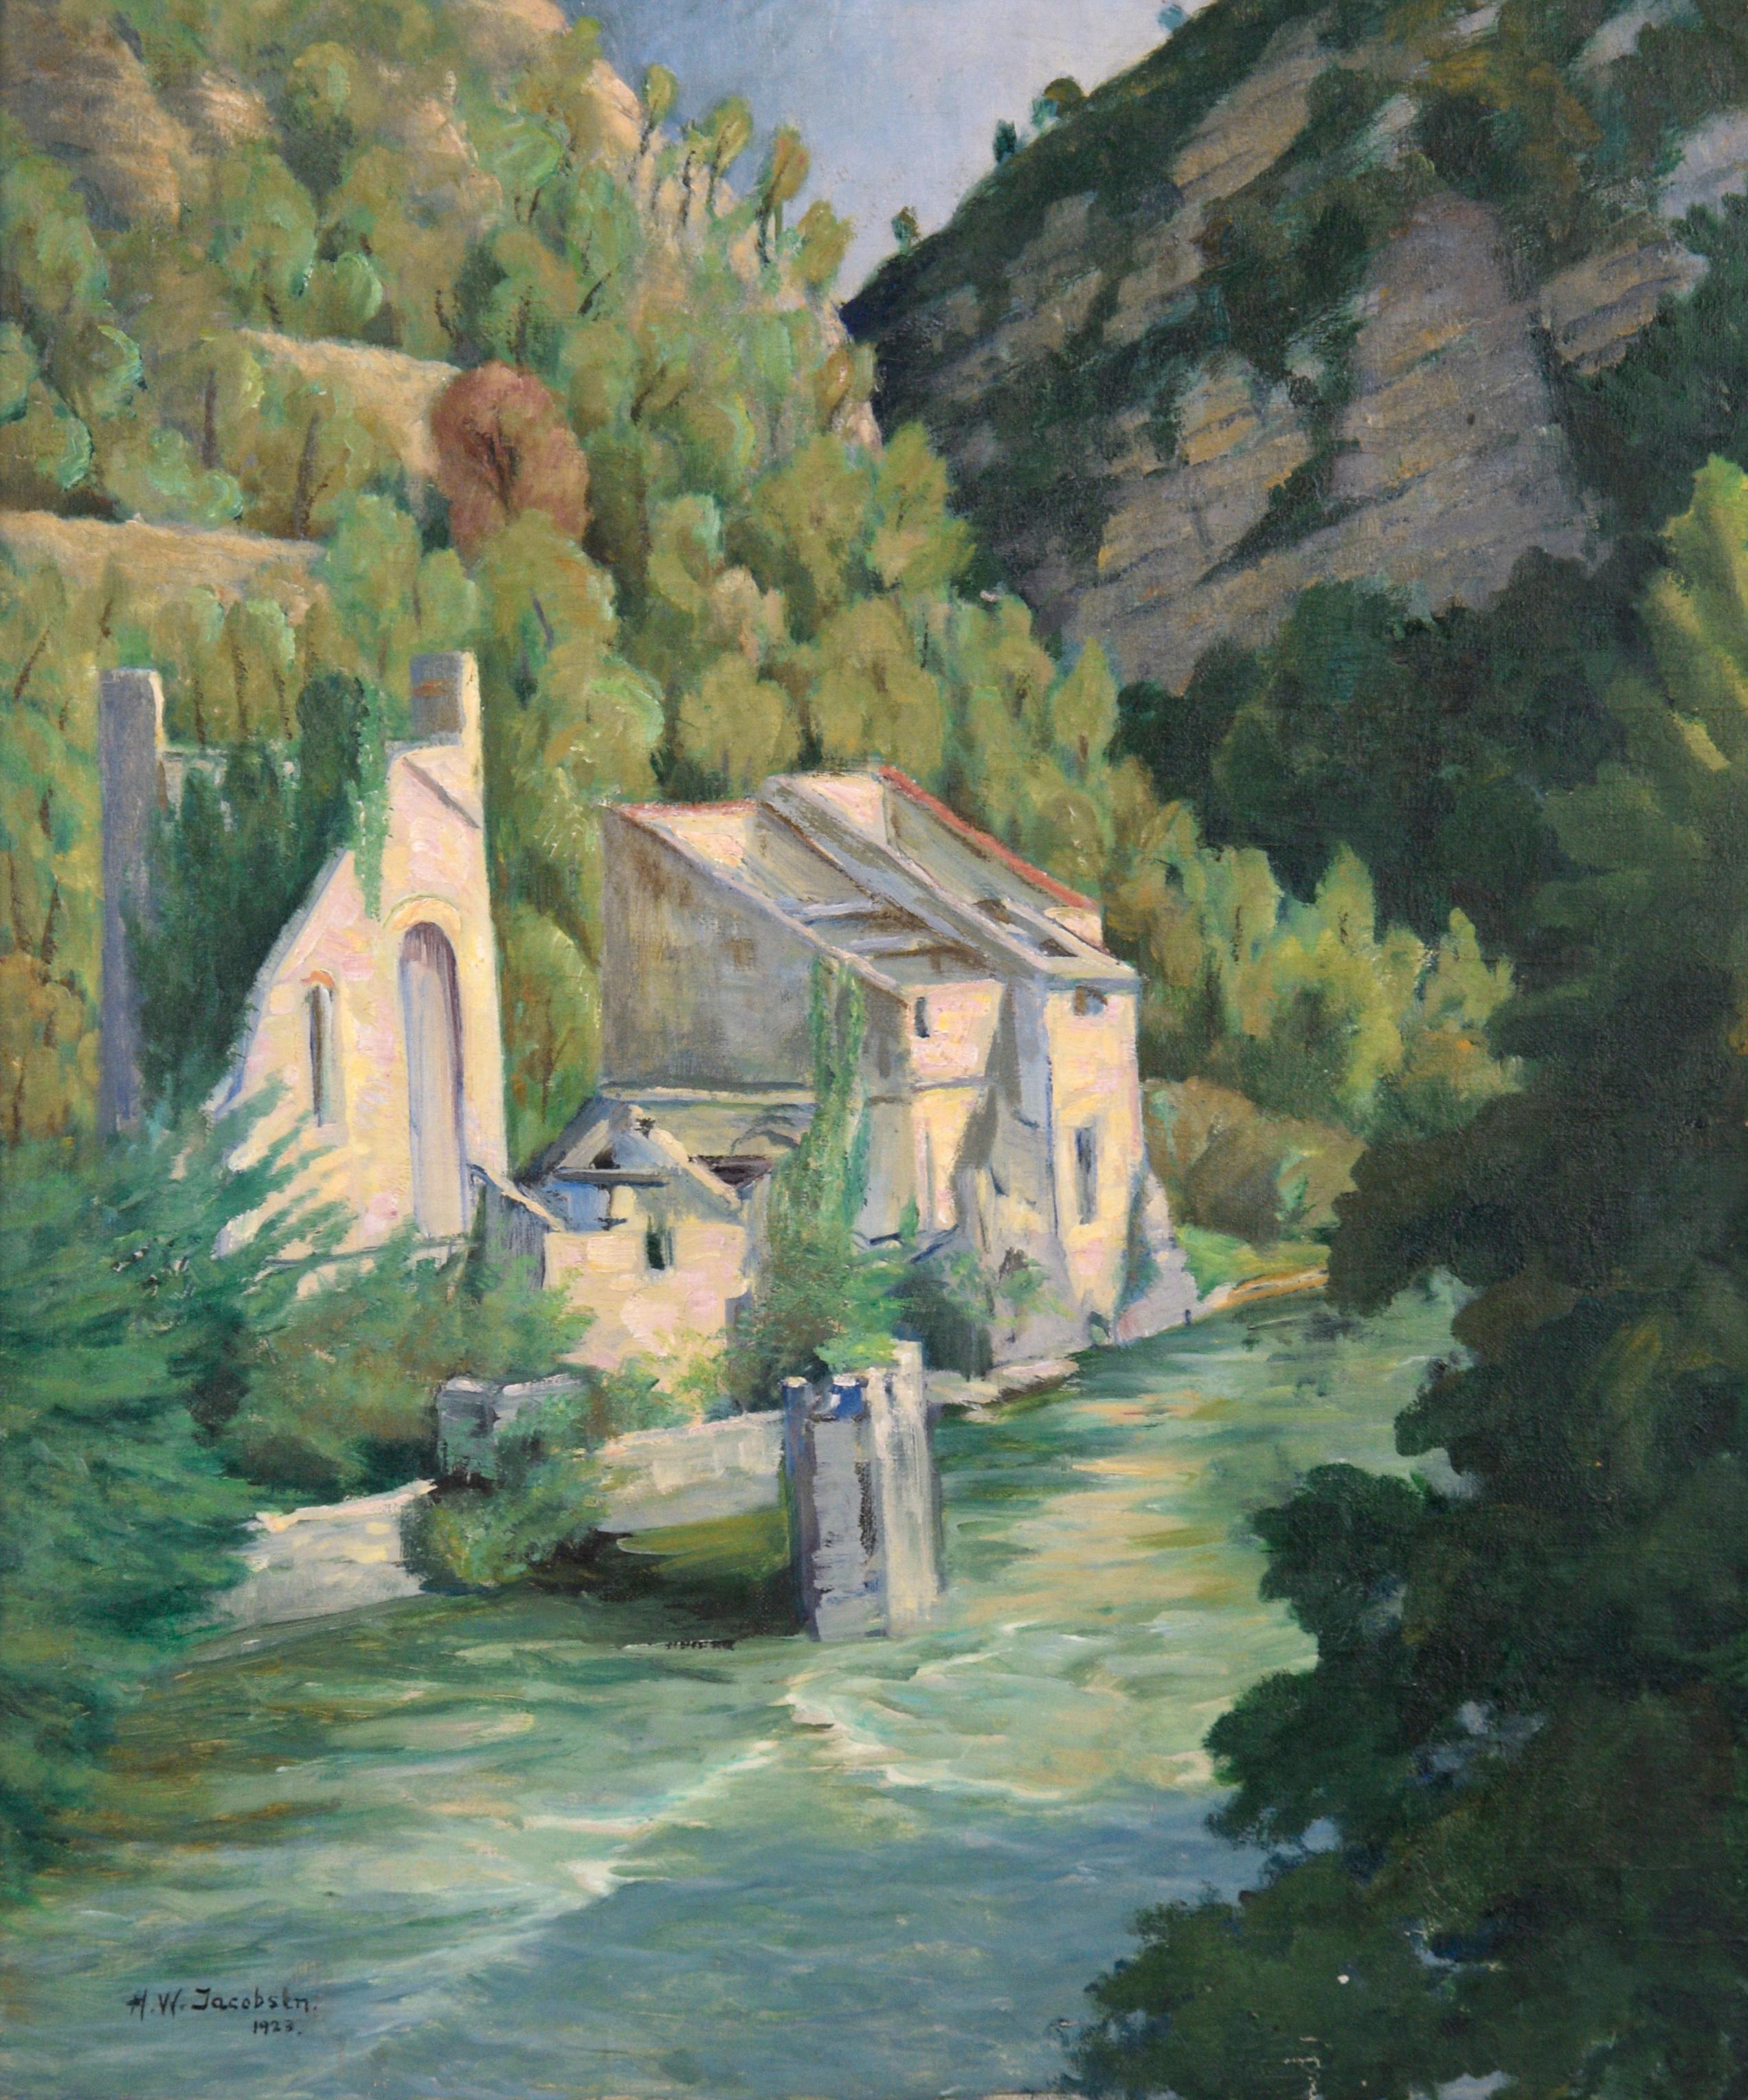 Monastery Ruins by the River - Landscape - Painting by H. W. Jacobsen